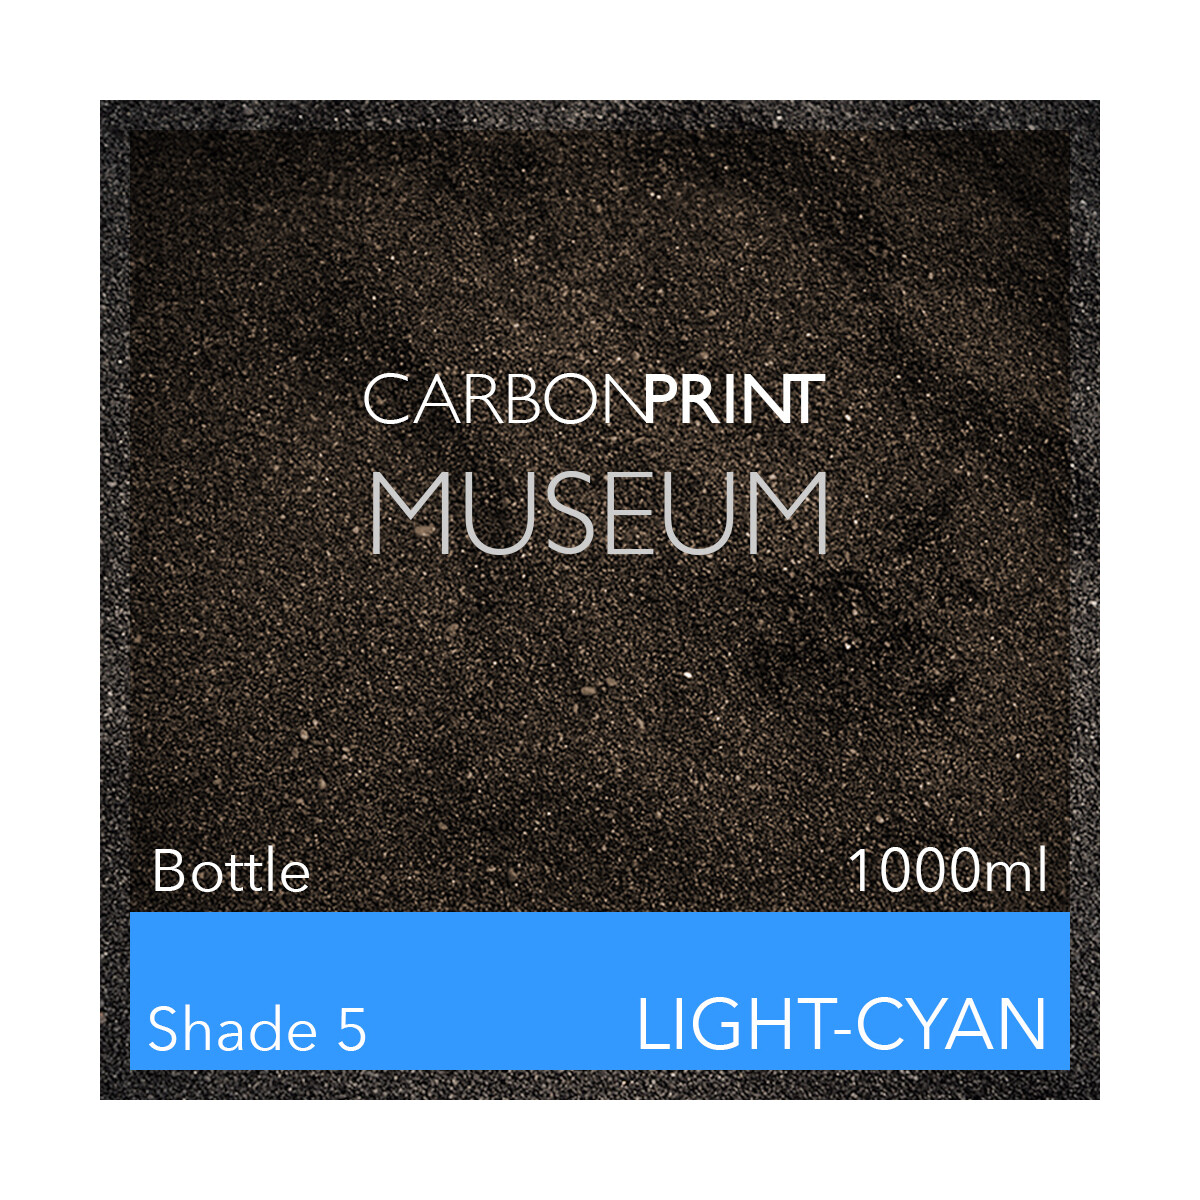 Carbonprint Museum Shade5 Channel LC 1000ml